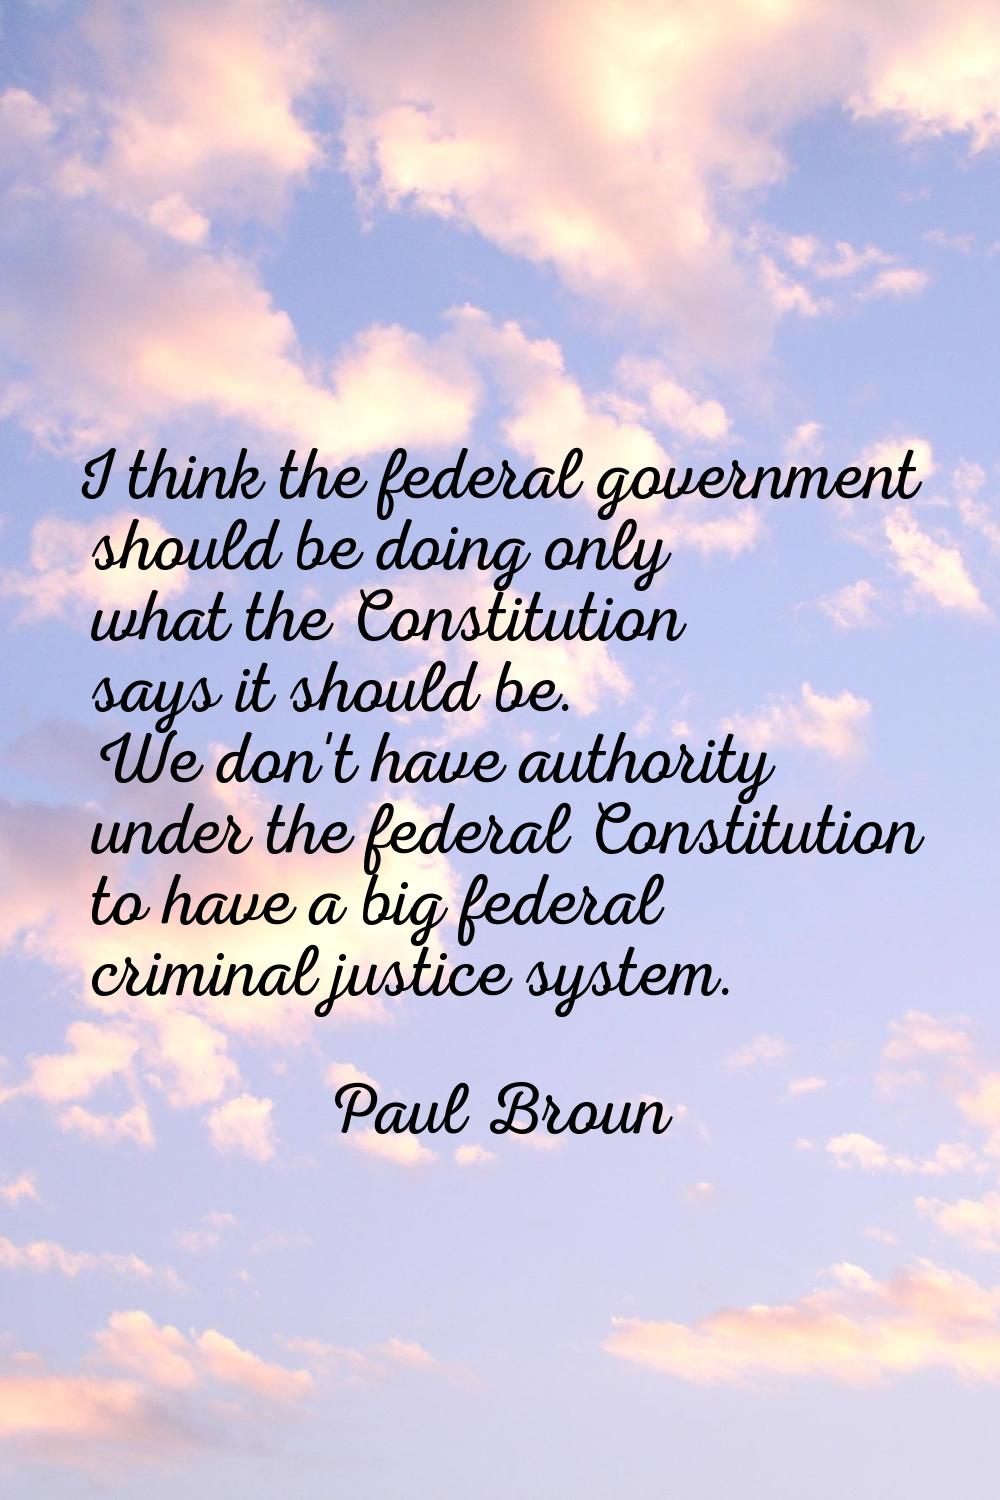 I think the federal government should be doing only what the Constitution says it should be. We don